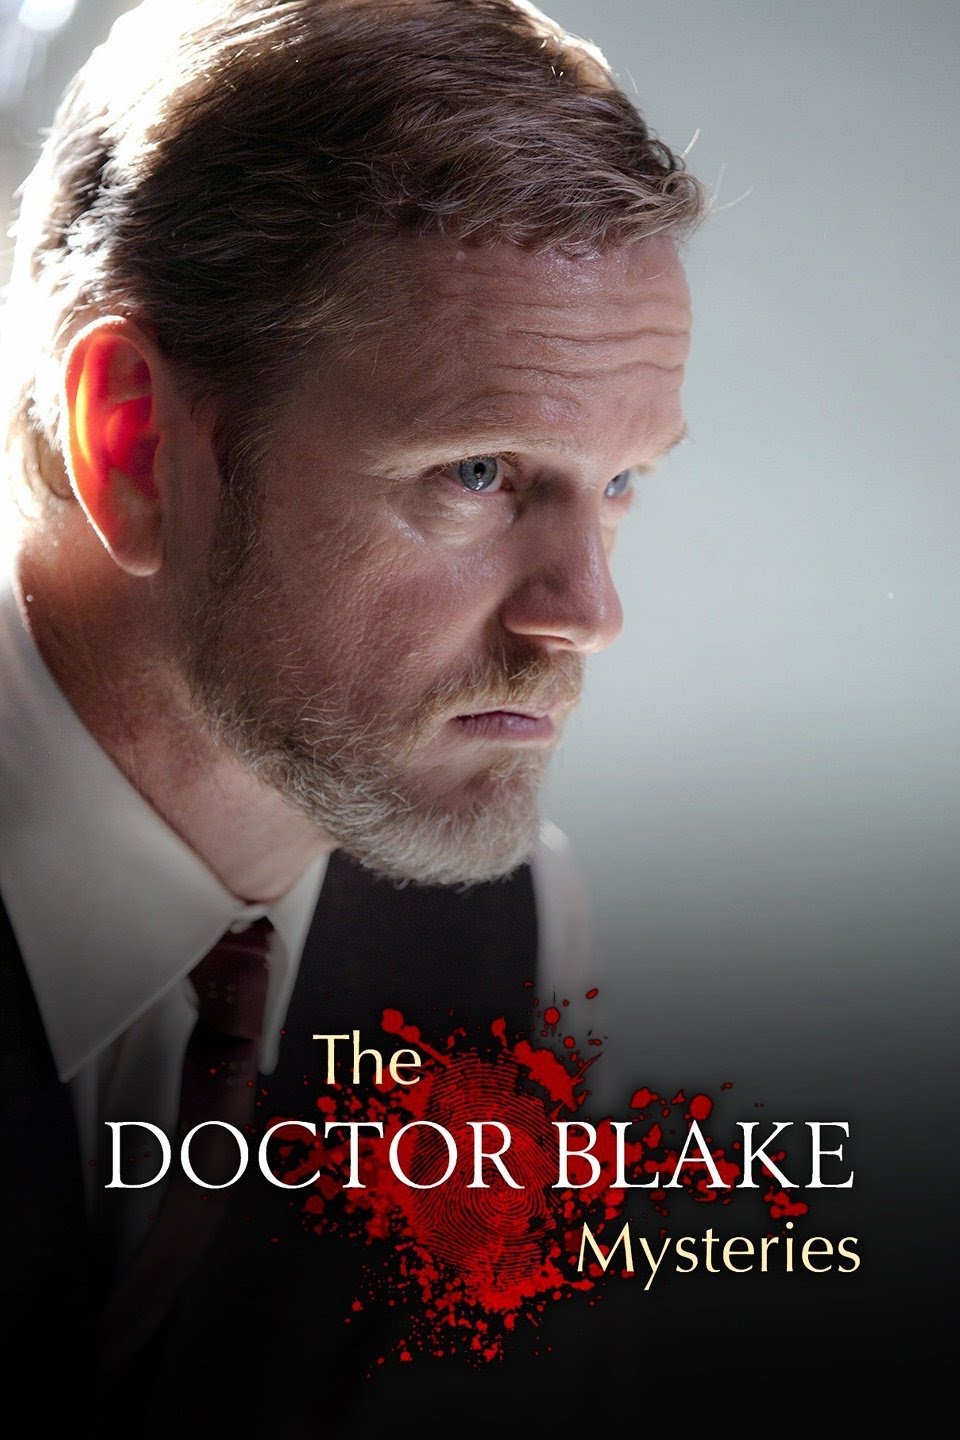 The Doctor Blake Mysteries S1 D2